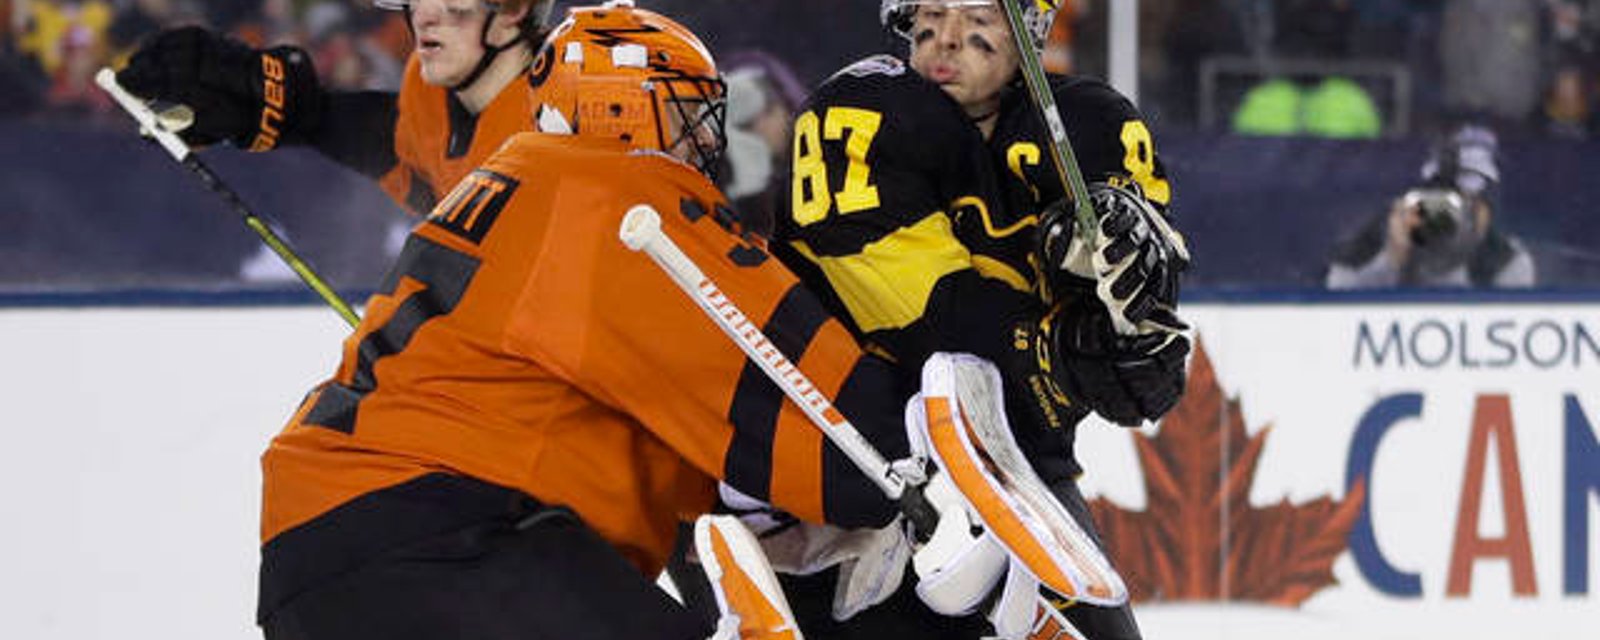 Penguins throw away uniforms and equipment due to “bad luck”